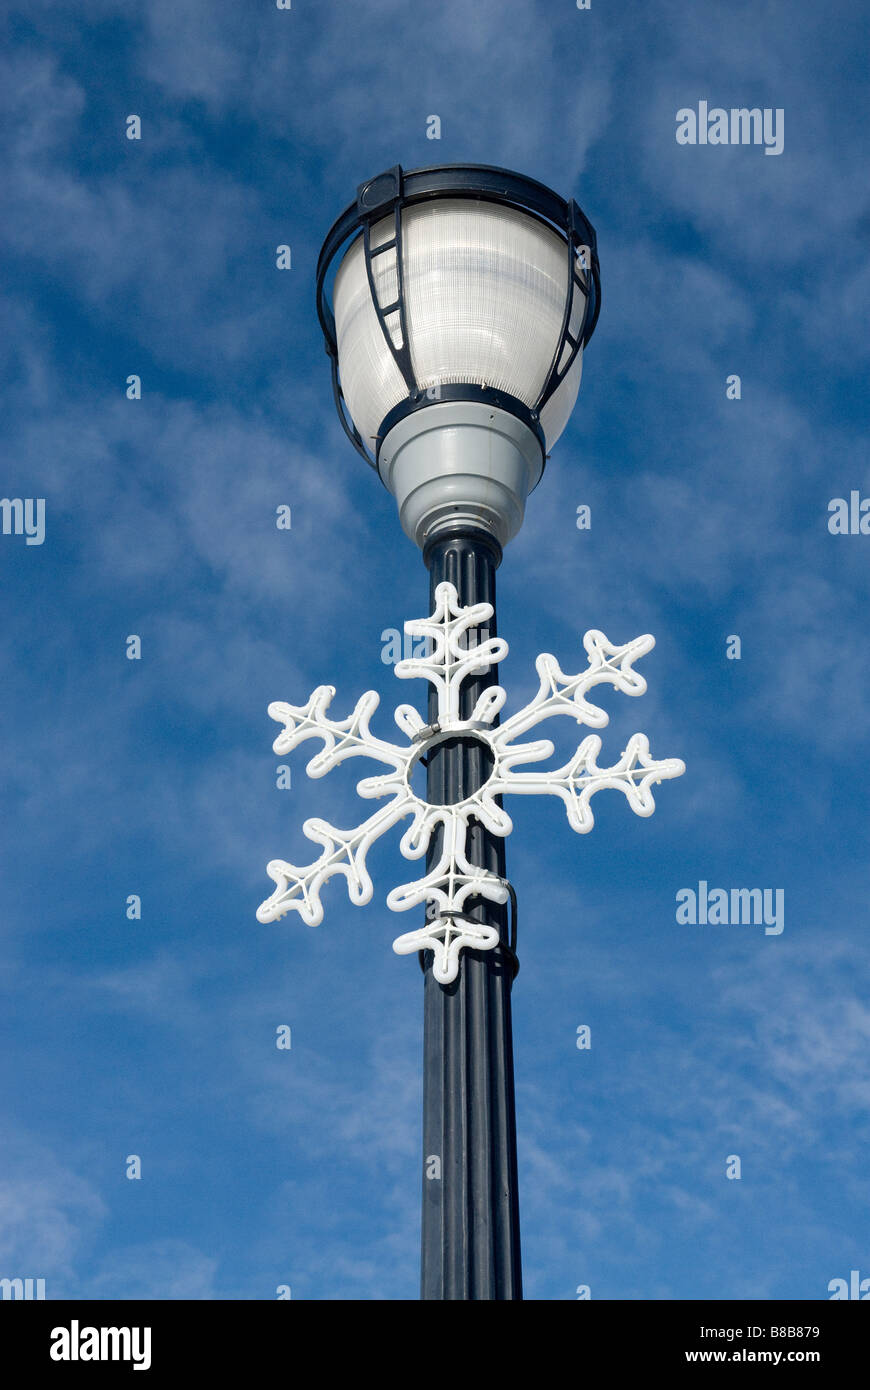 Streetlamp with large snowflake or Christmas ornament hanging from it, against a bright blue sky Stock Photo